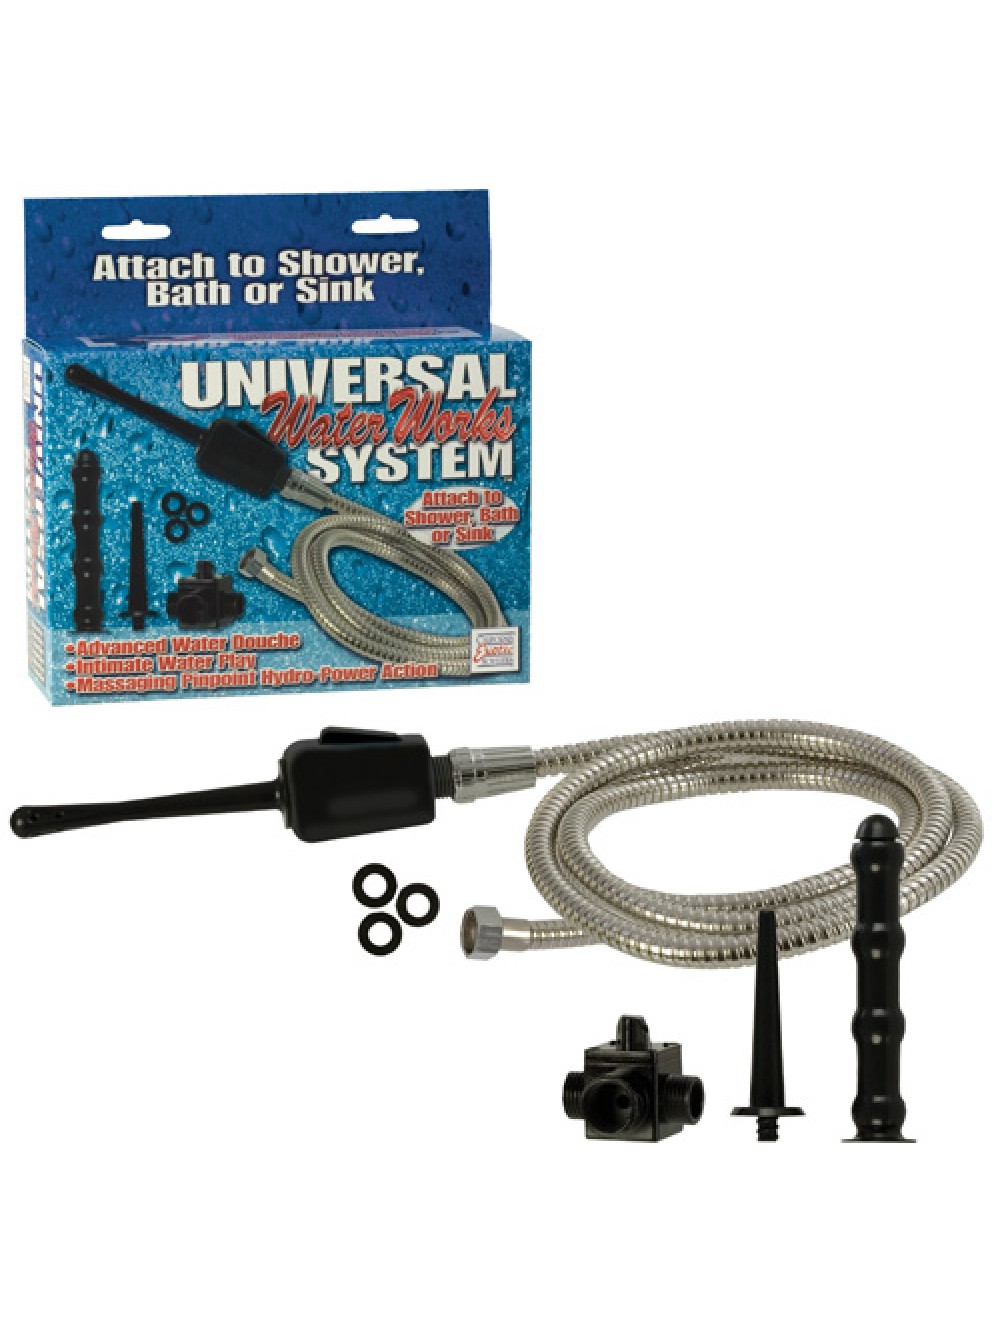 Universal Water Works System Douche 716770048684